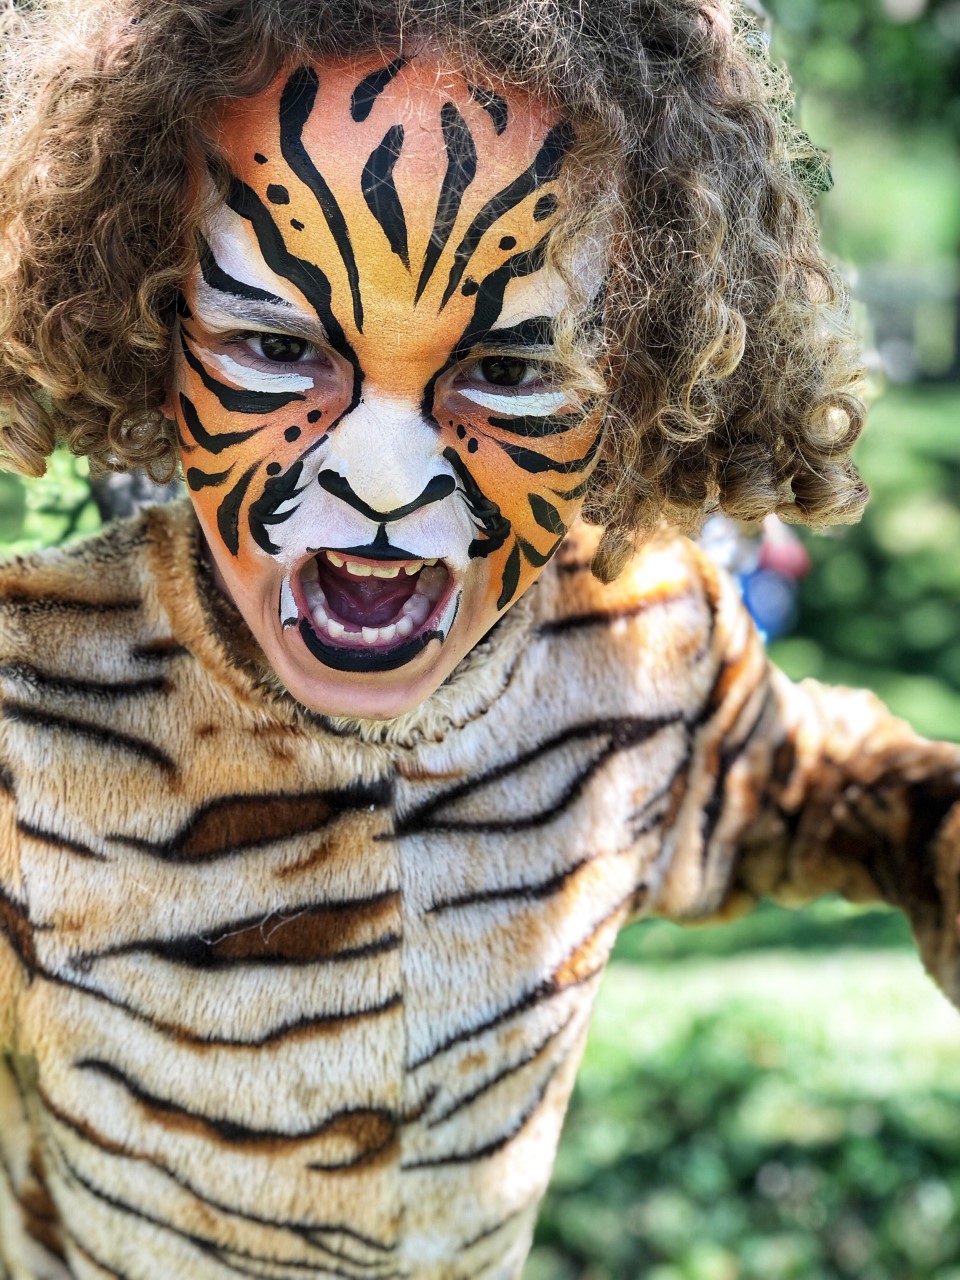 activity idea for a tiger themed birthday party: tiger face painting